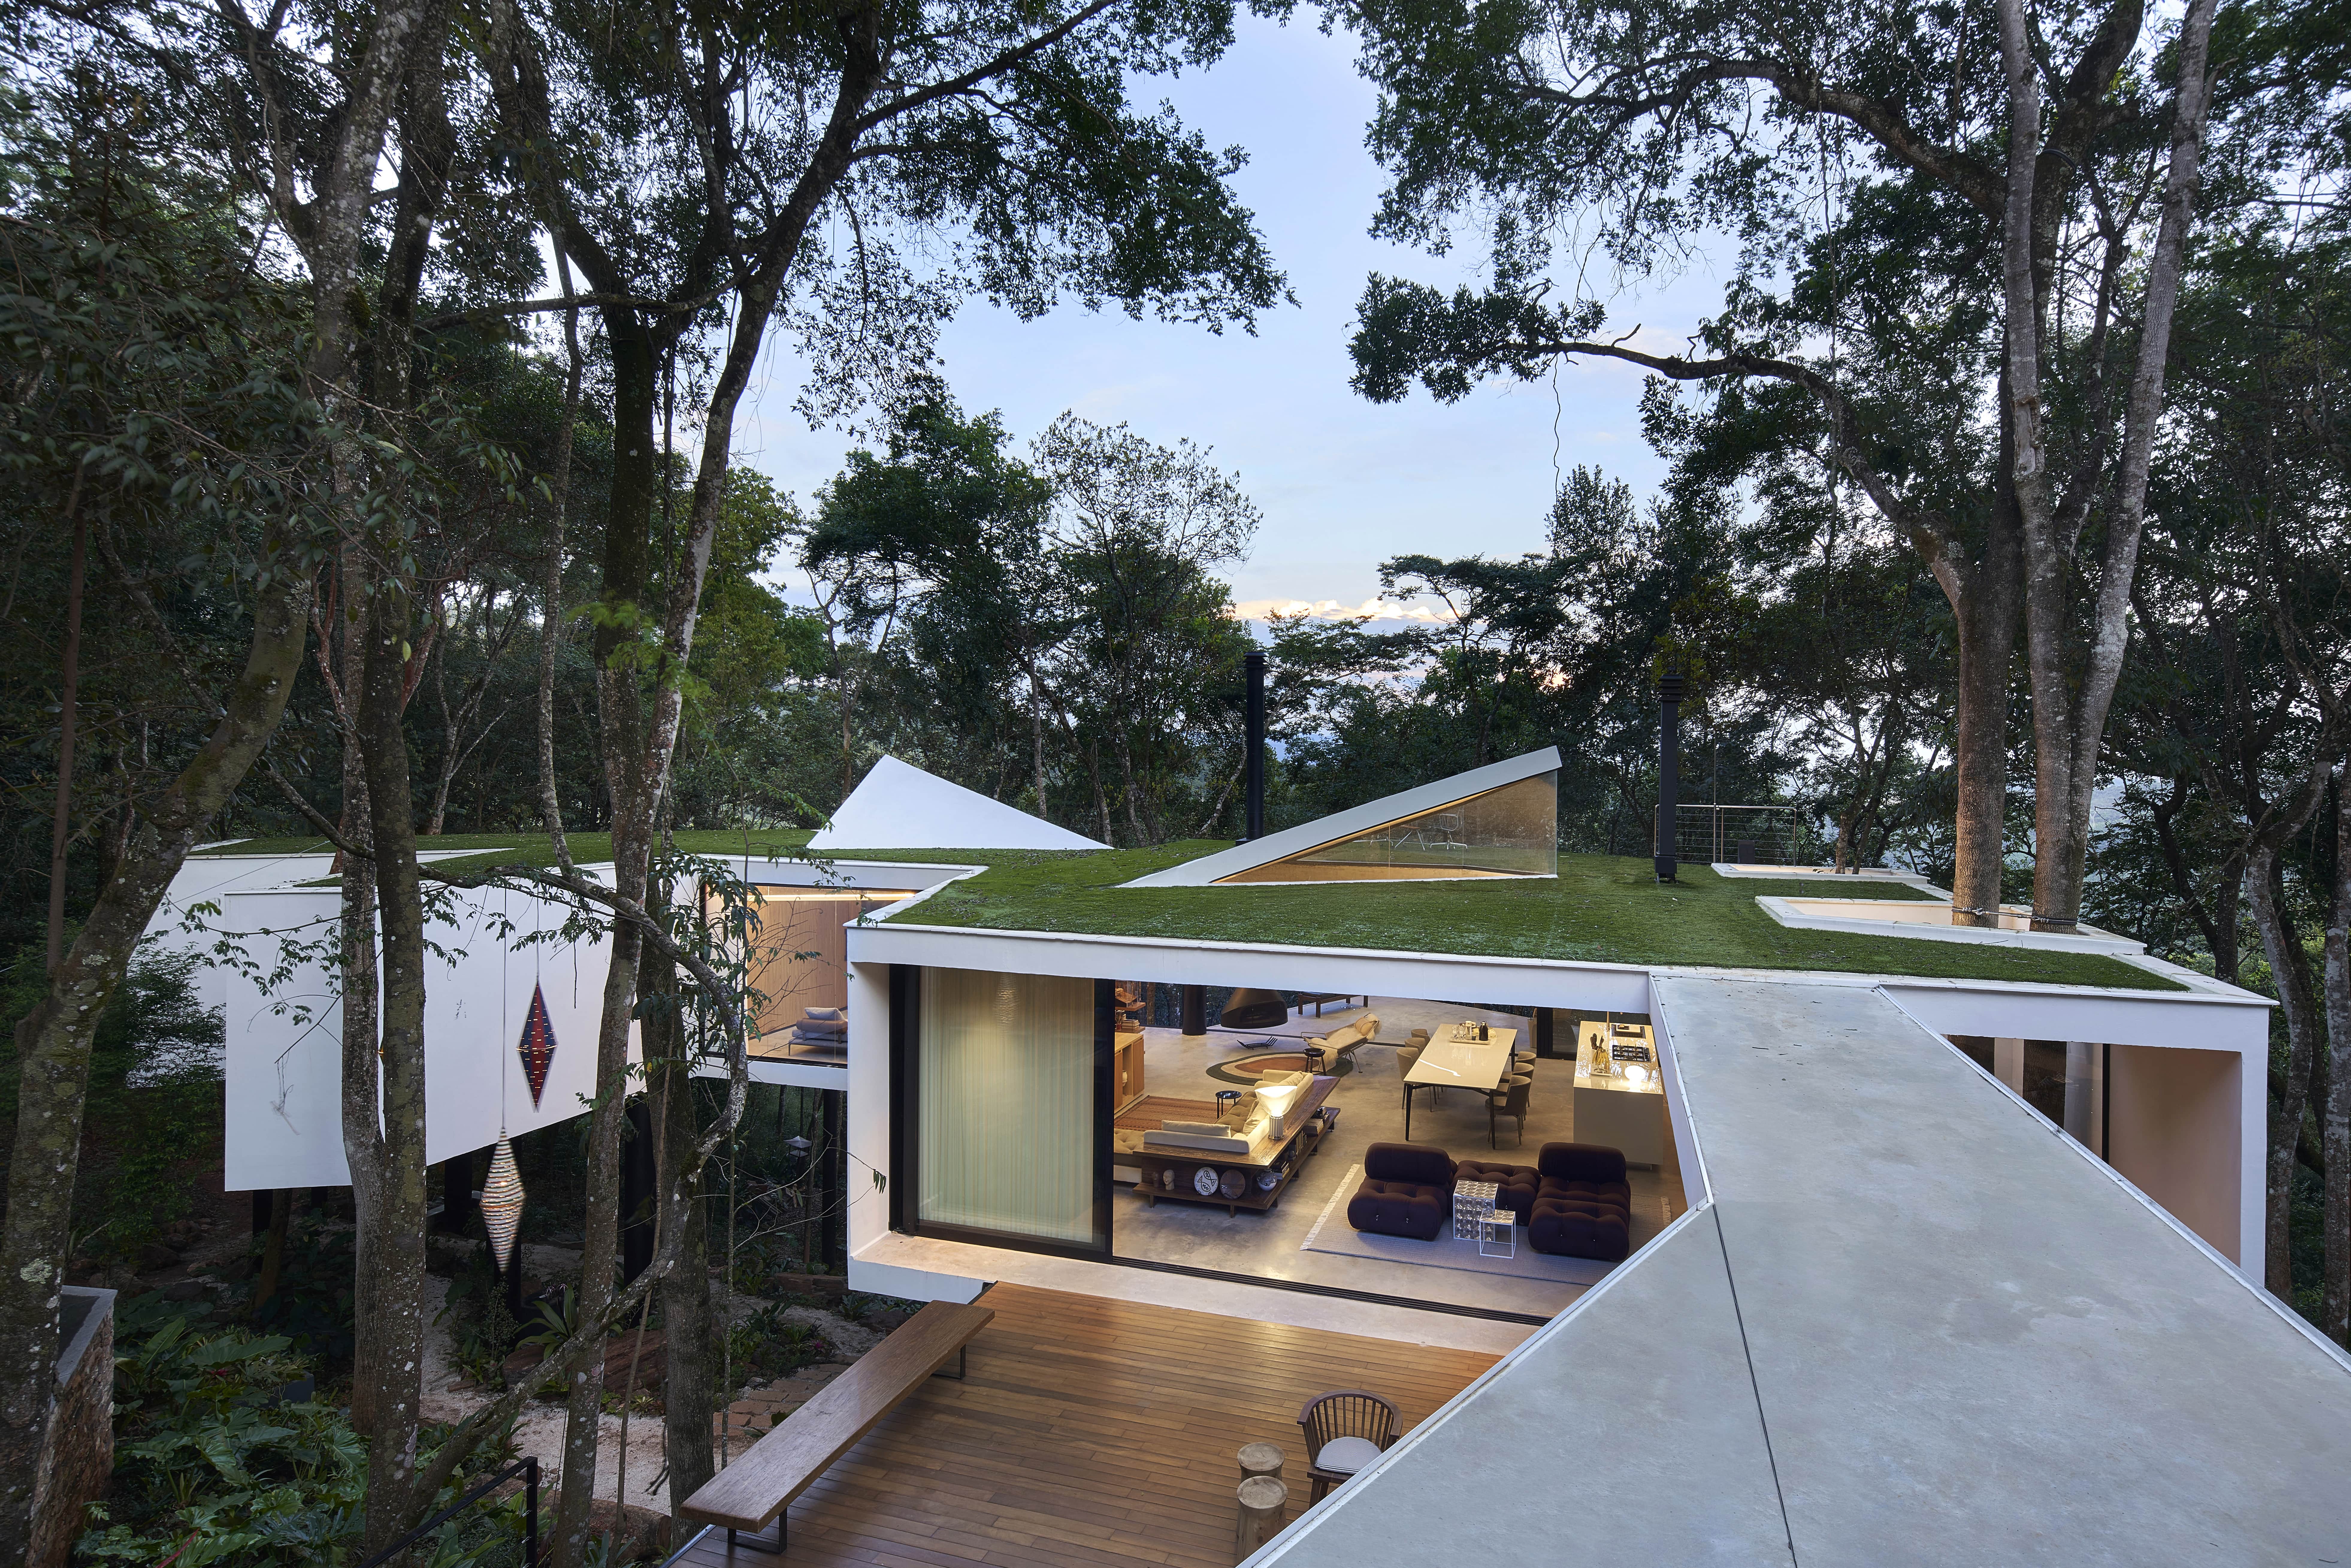 There is plenty of space at Casa Açucena where you can enjoy the treetop views